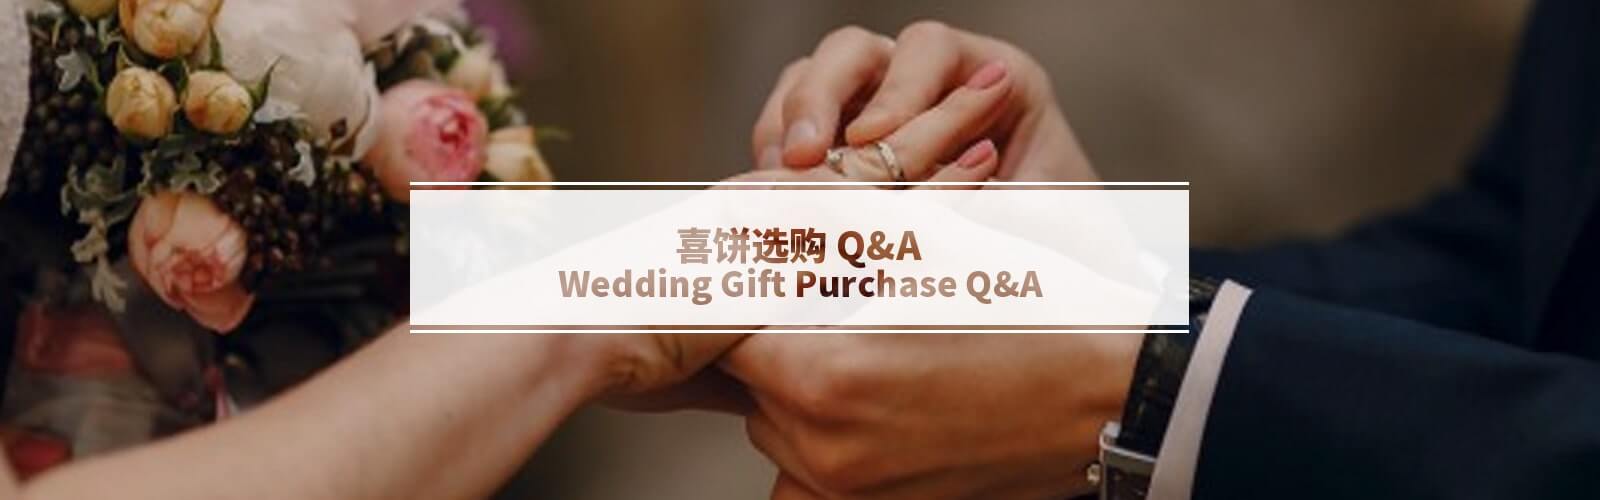 Wedding Gift Purchase Q&A